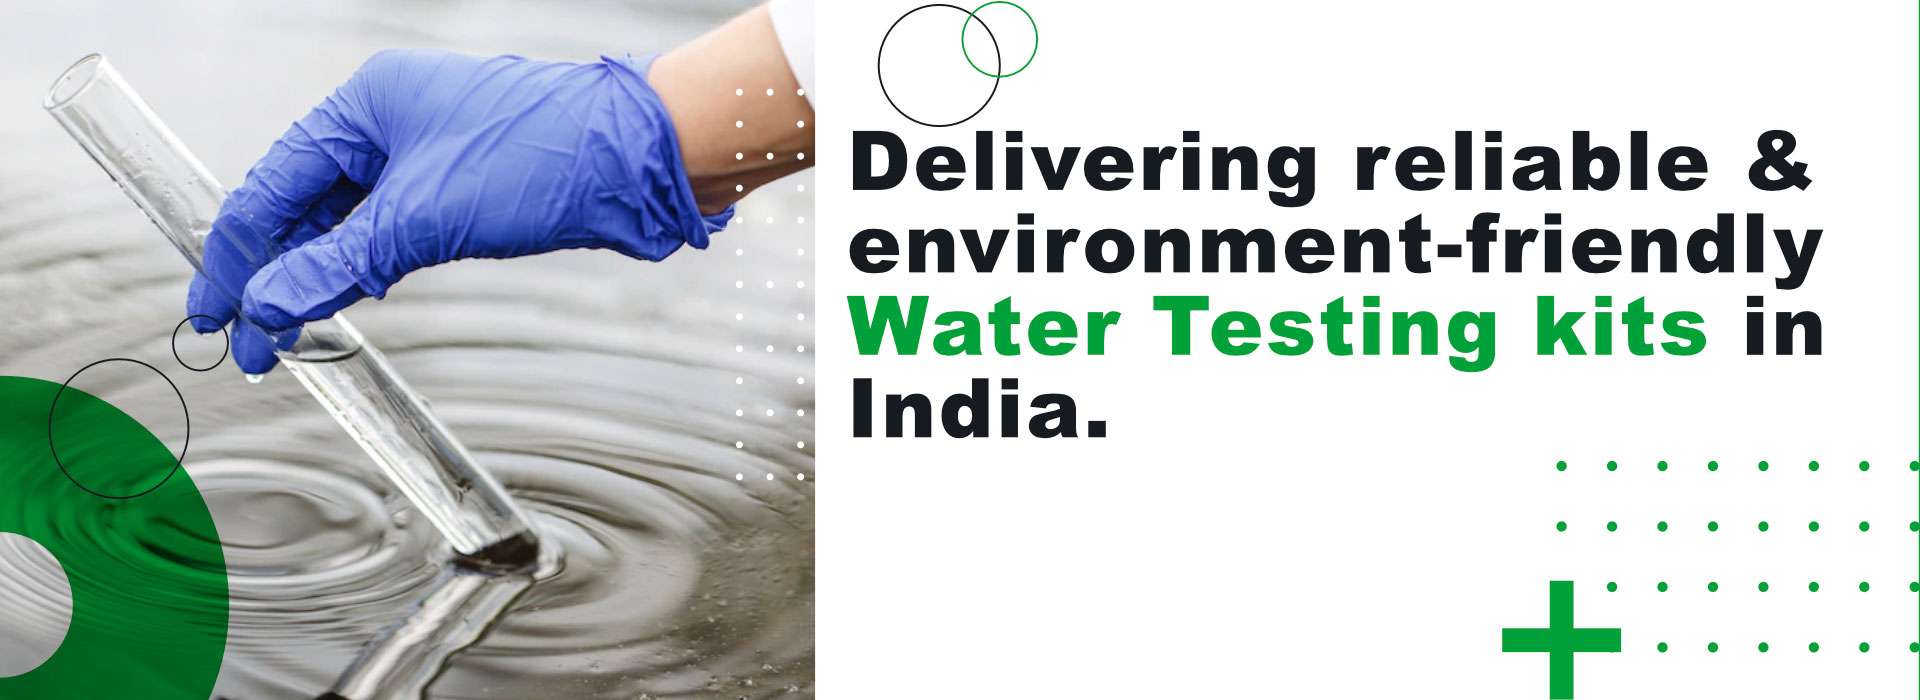  Delivering reliable & environment-friendly water Testing kits in India Manufacturers in Faridabad